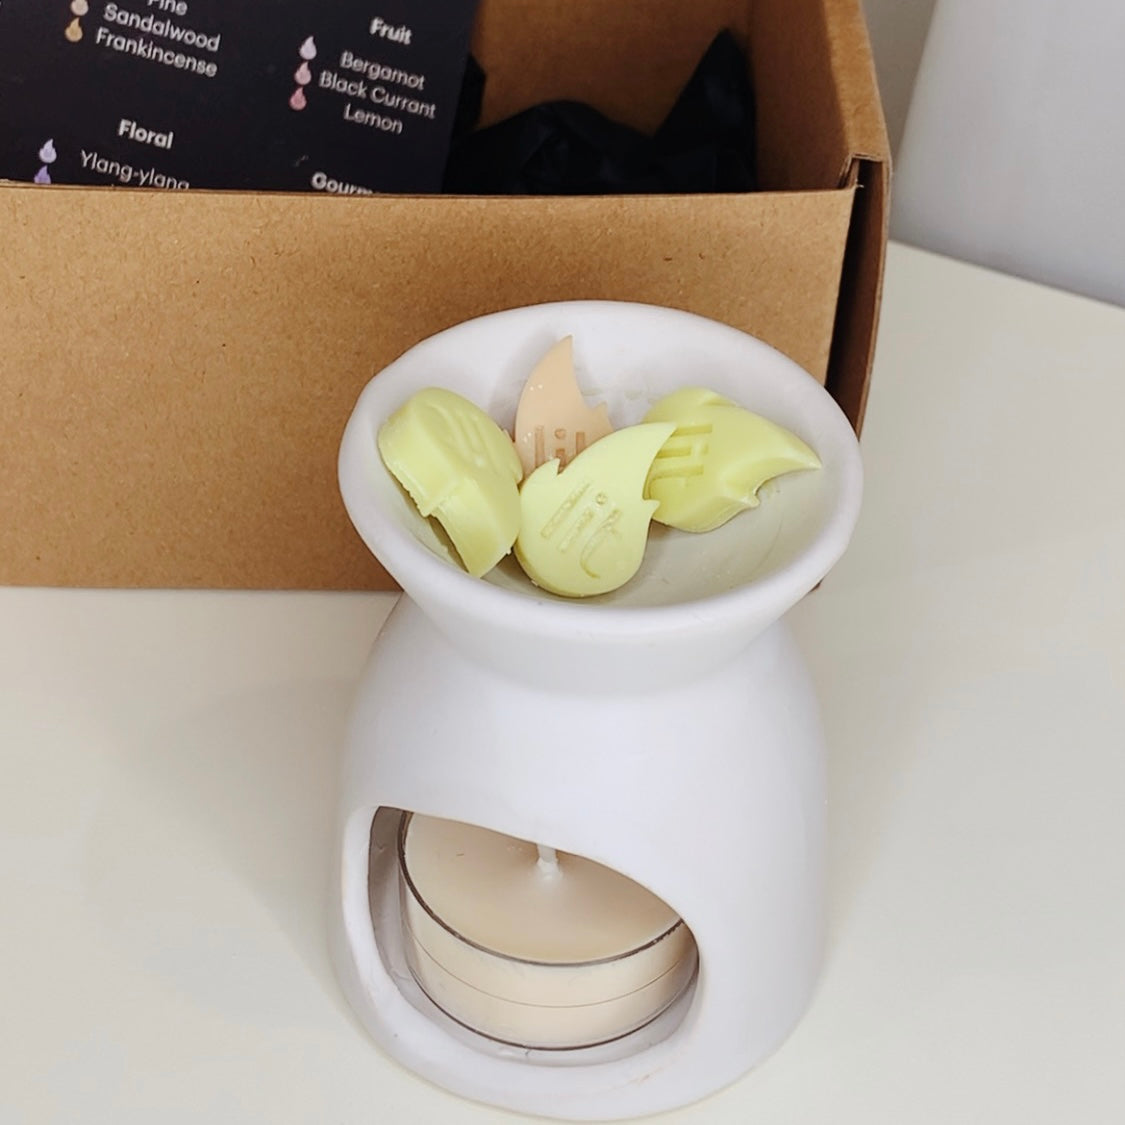 Lit Candle Co. wax burner, wax melts, soy wax, fragrance, relaxation, destress, creative, oil blends, best soy candle, best wax melts, philippines, ph